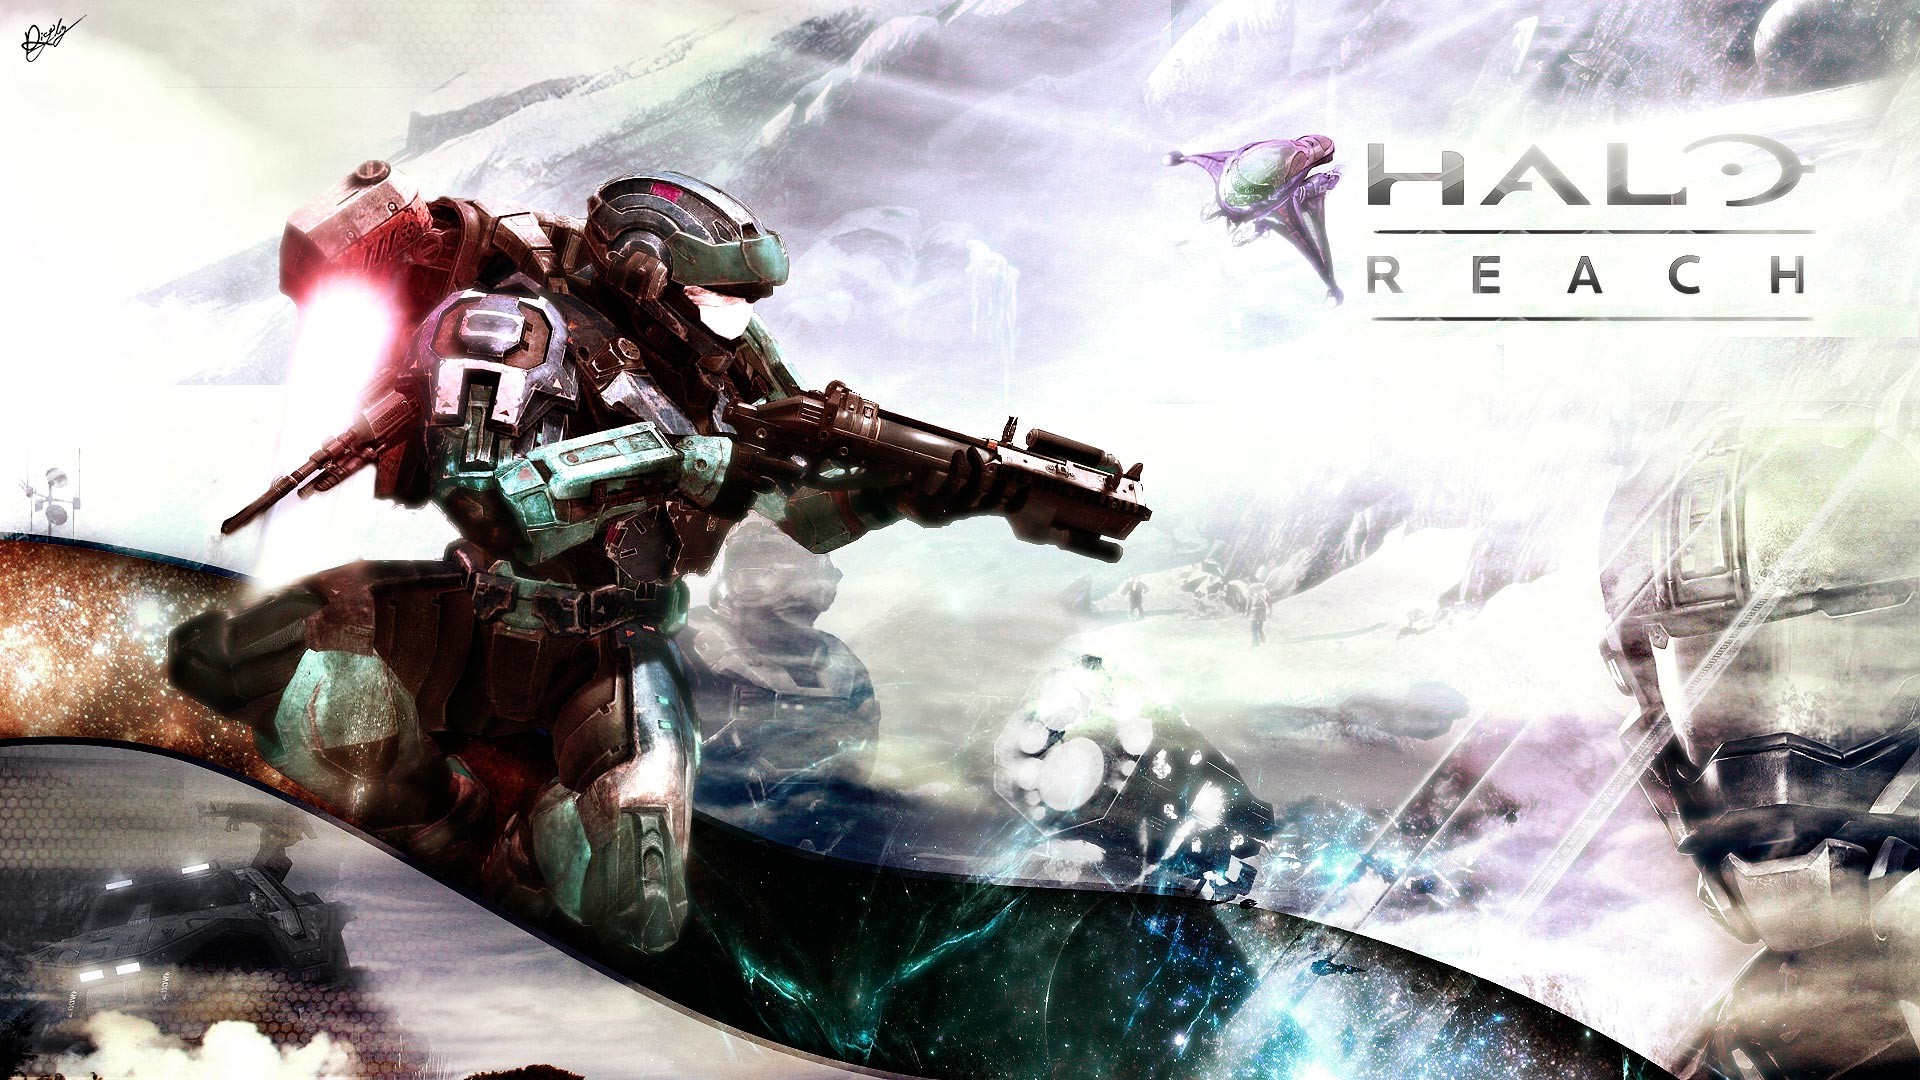 1920x1080 Halo: Reach HD Wallpaper | Background Image |  | ID:510144 -  Wallpaper Abyss